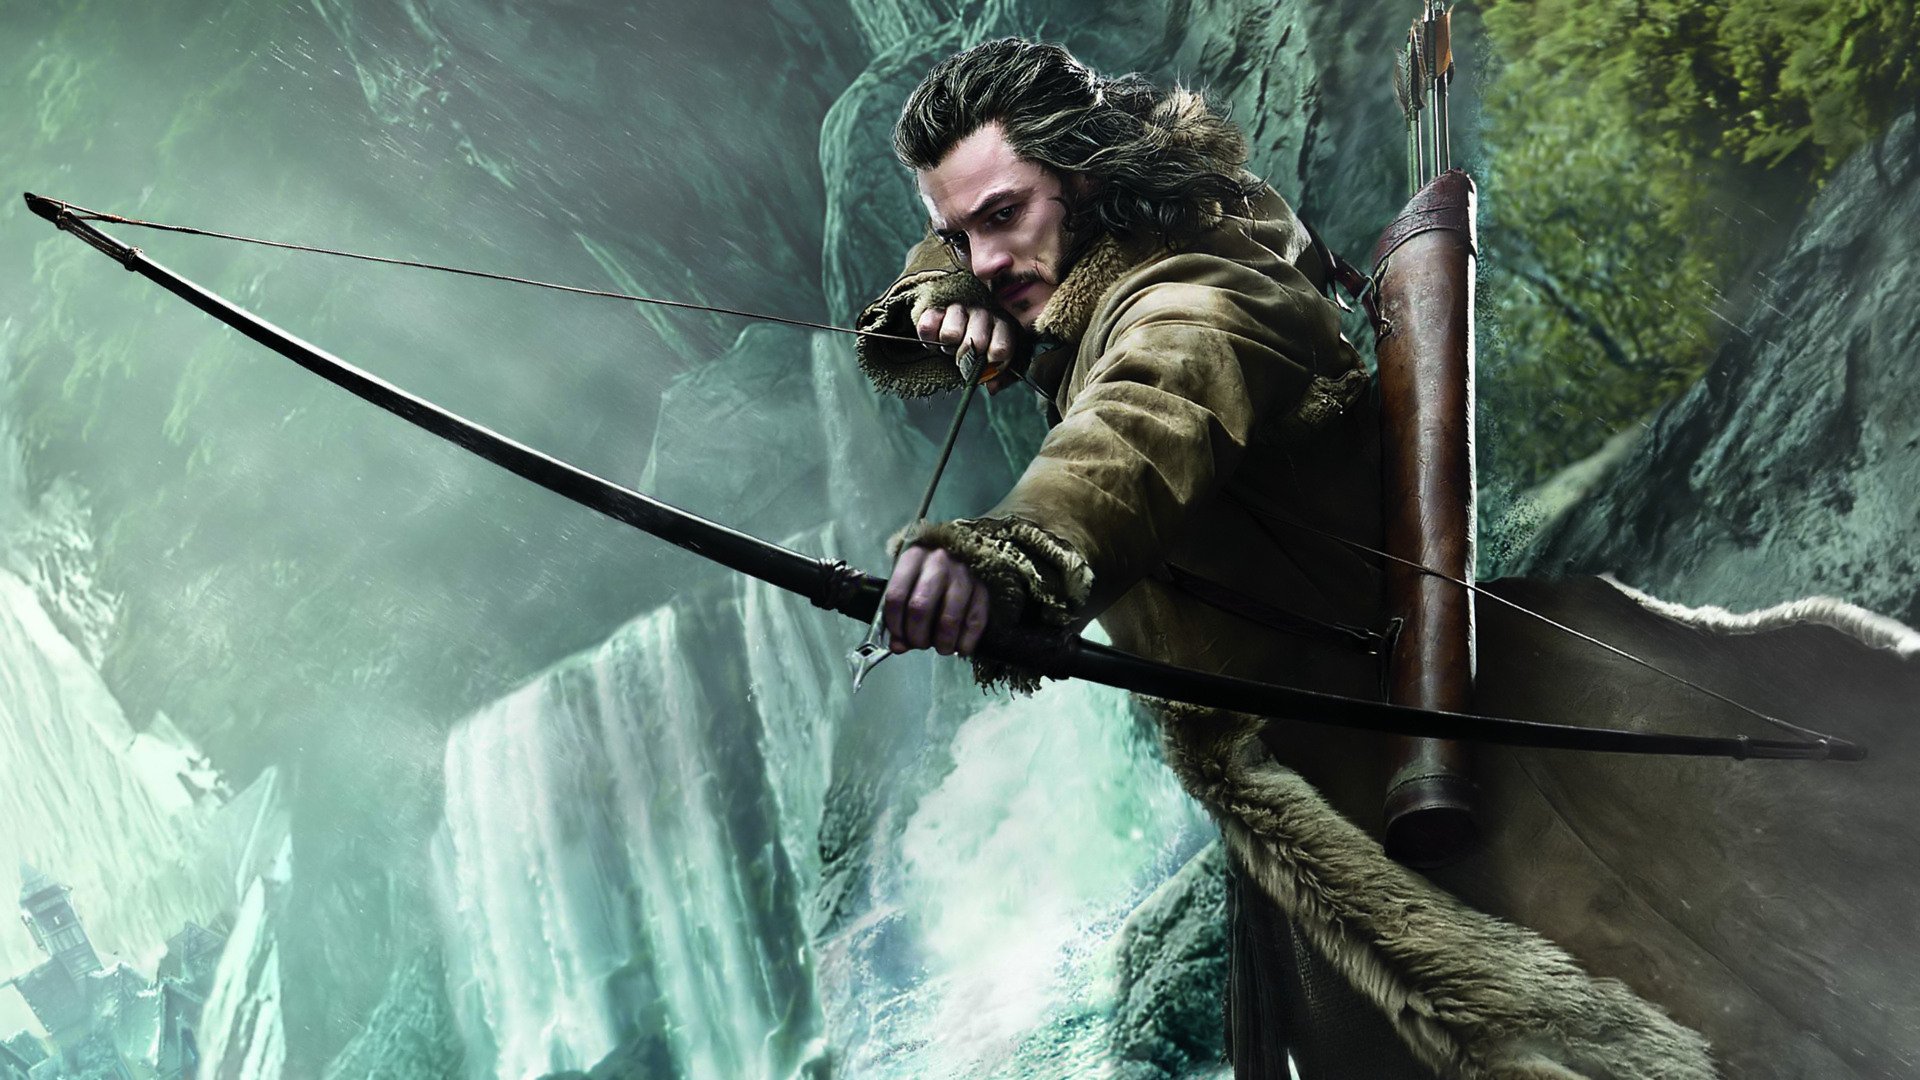 The Hobbit: The Desolation of Smaug download the last version for android